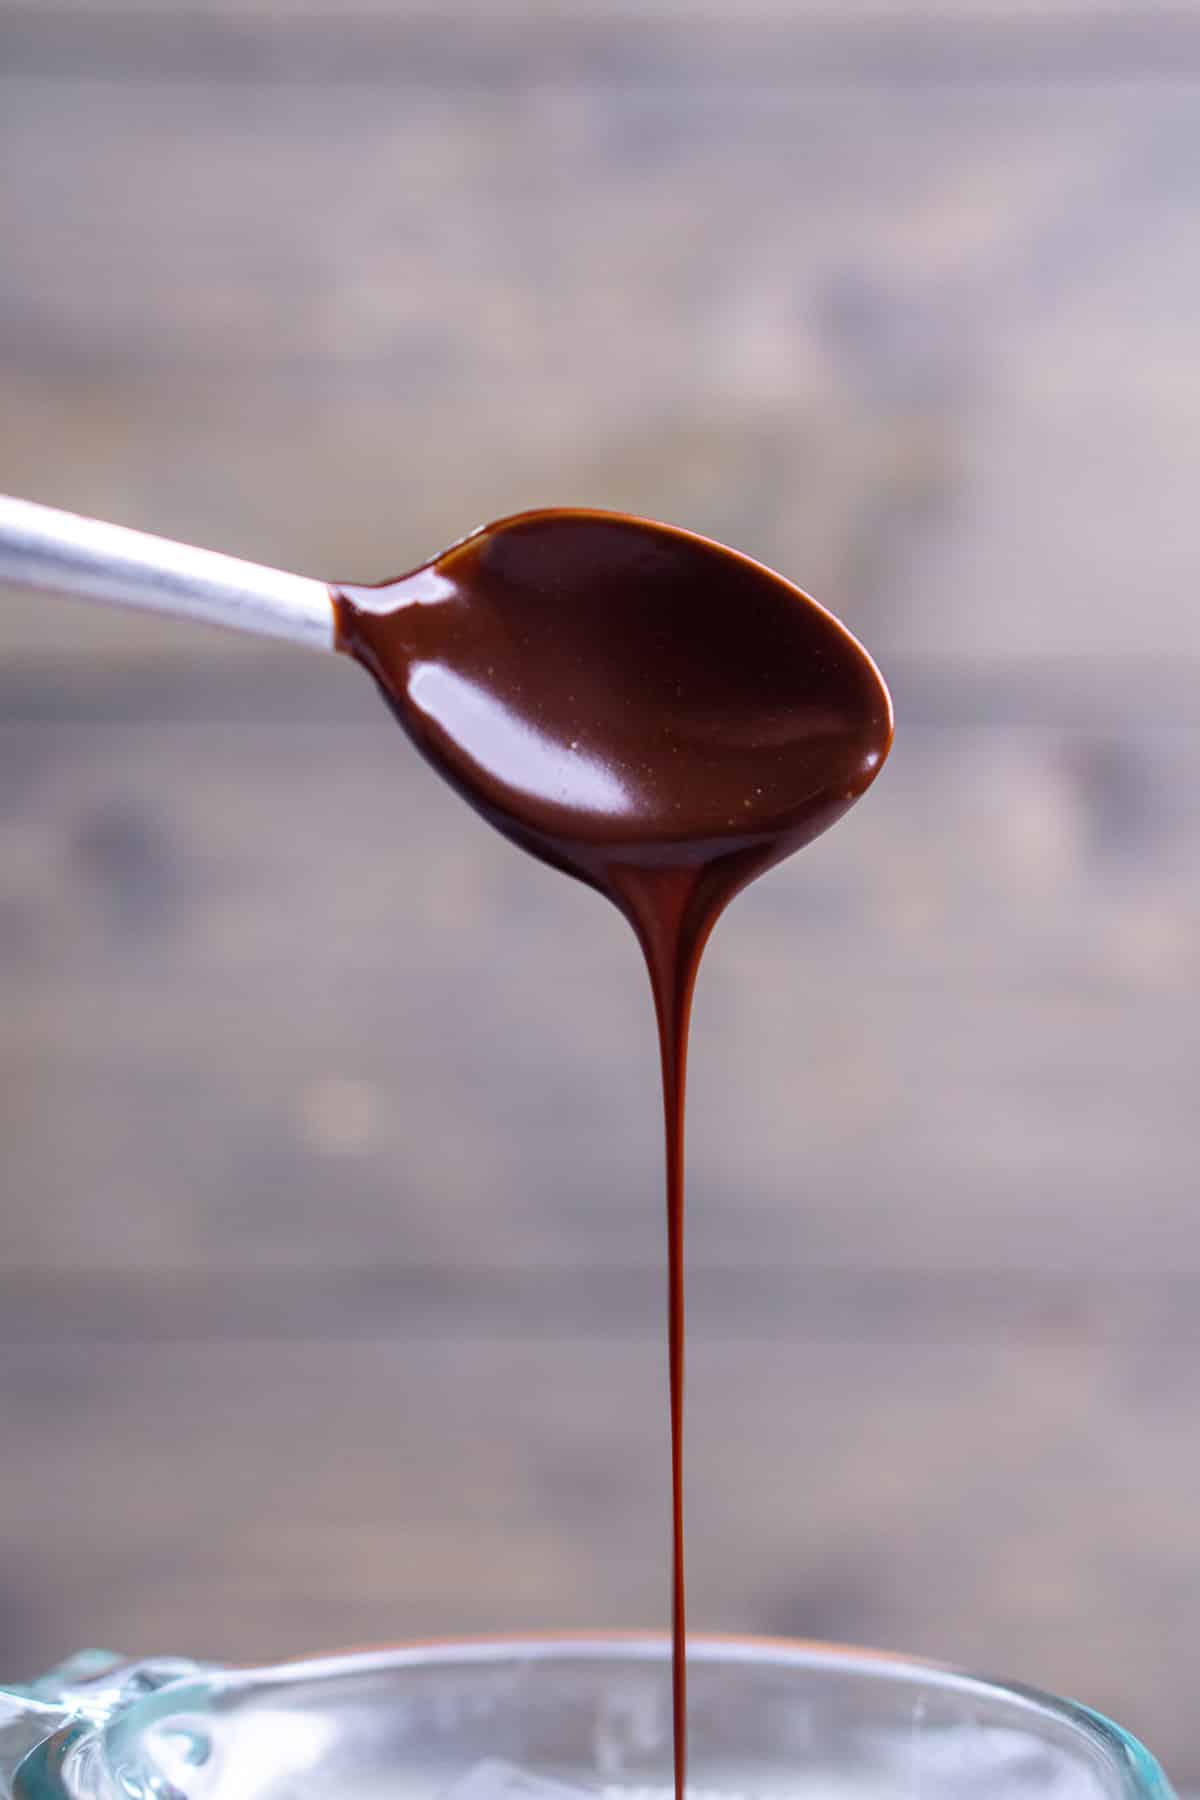 melted chocolate dripping from spoon in a solid stream